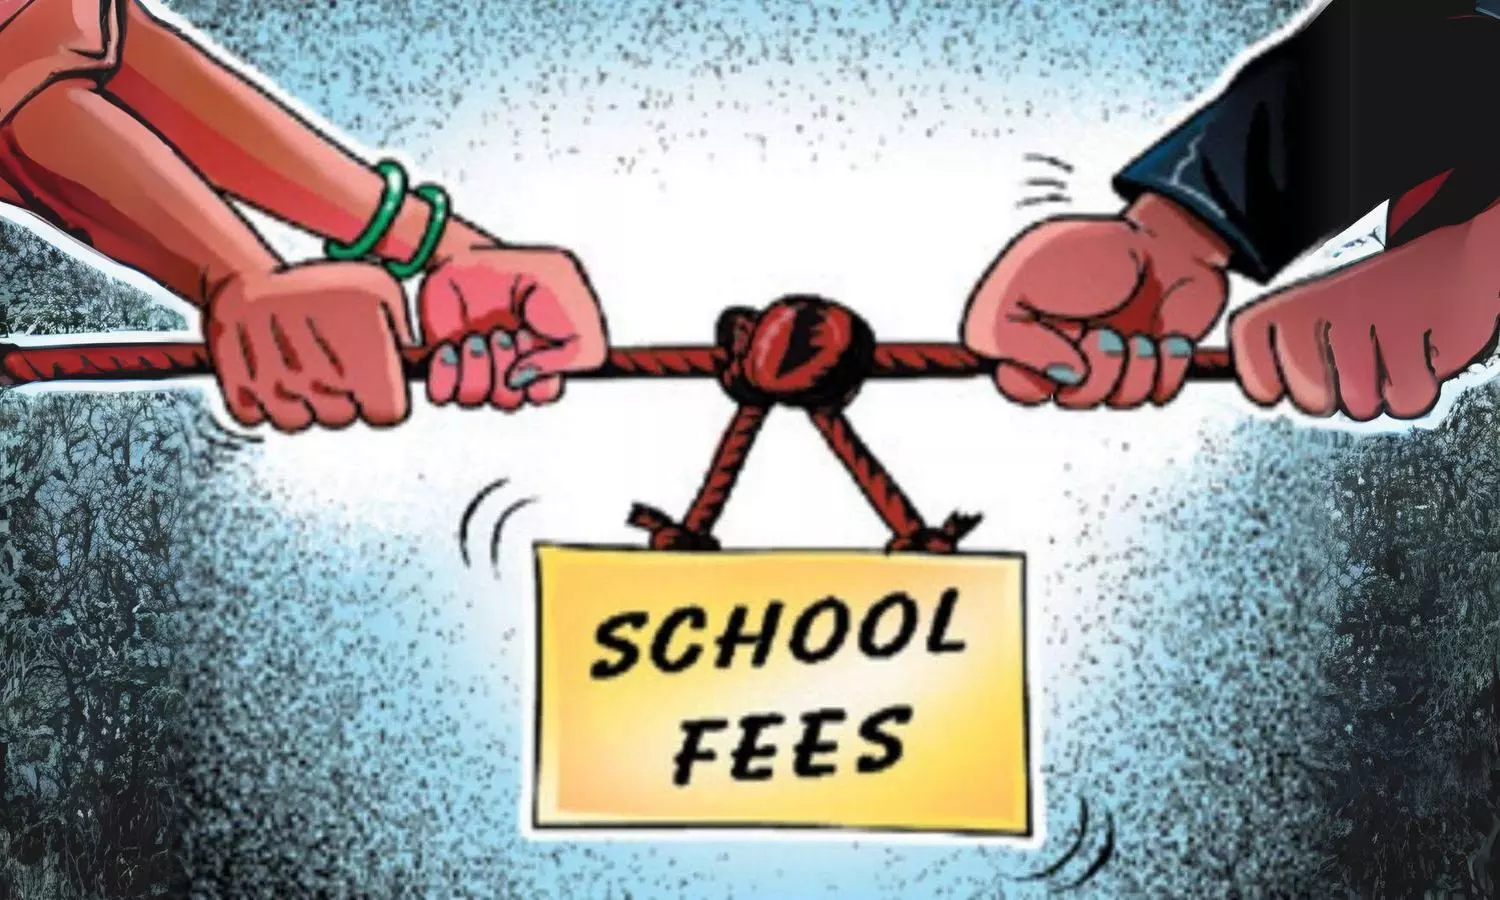 Fathers Post Raises Concerns over Grade 3 School Fees in Gurgaon Soaring to ₹30,000 Per Month